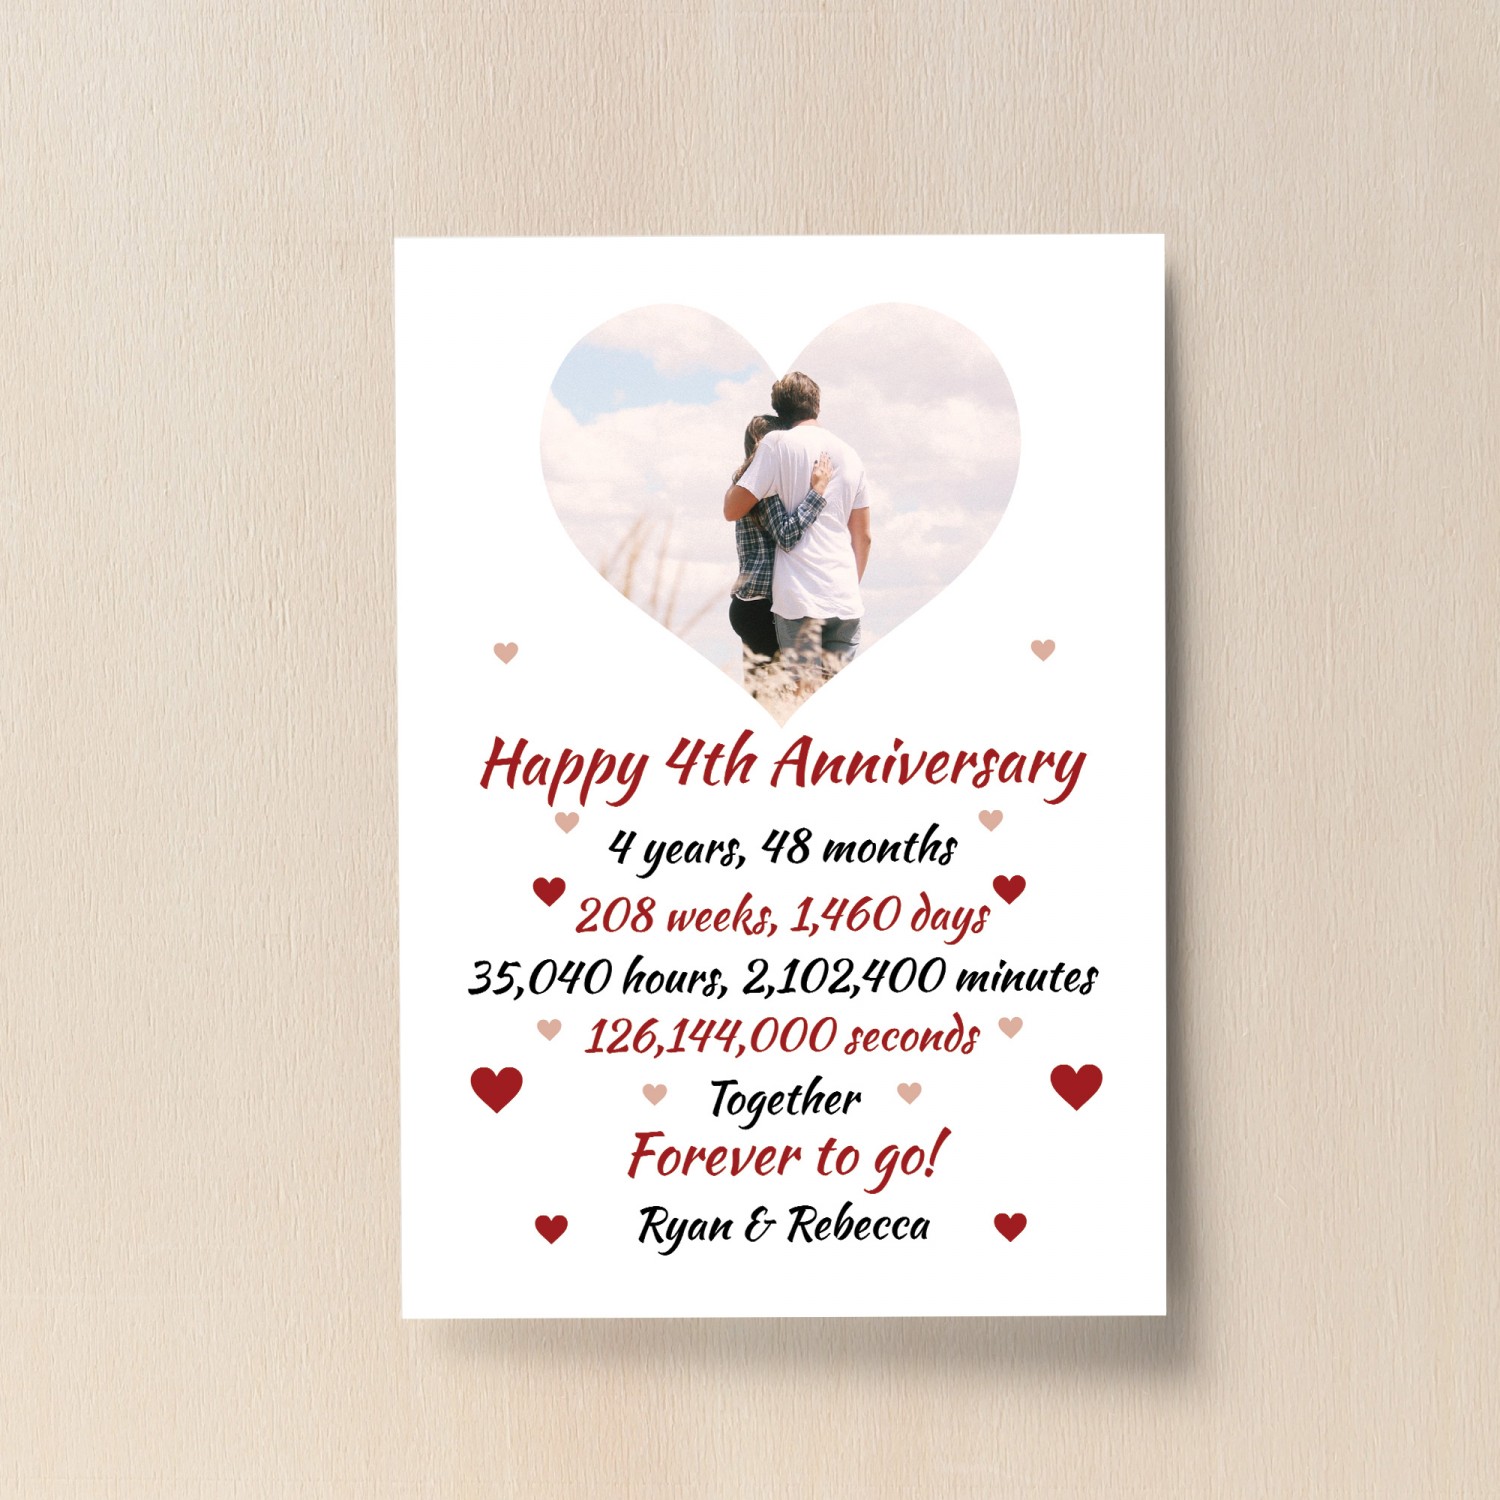 Resdink 4 Year Anniversary Card Gifts for Him Her Husband Wife, 4th Wedding  Anniversary Card for Women Men, Happy 4 Year Anniversary Card : Amazon.in:  Office Products